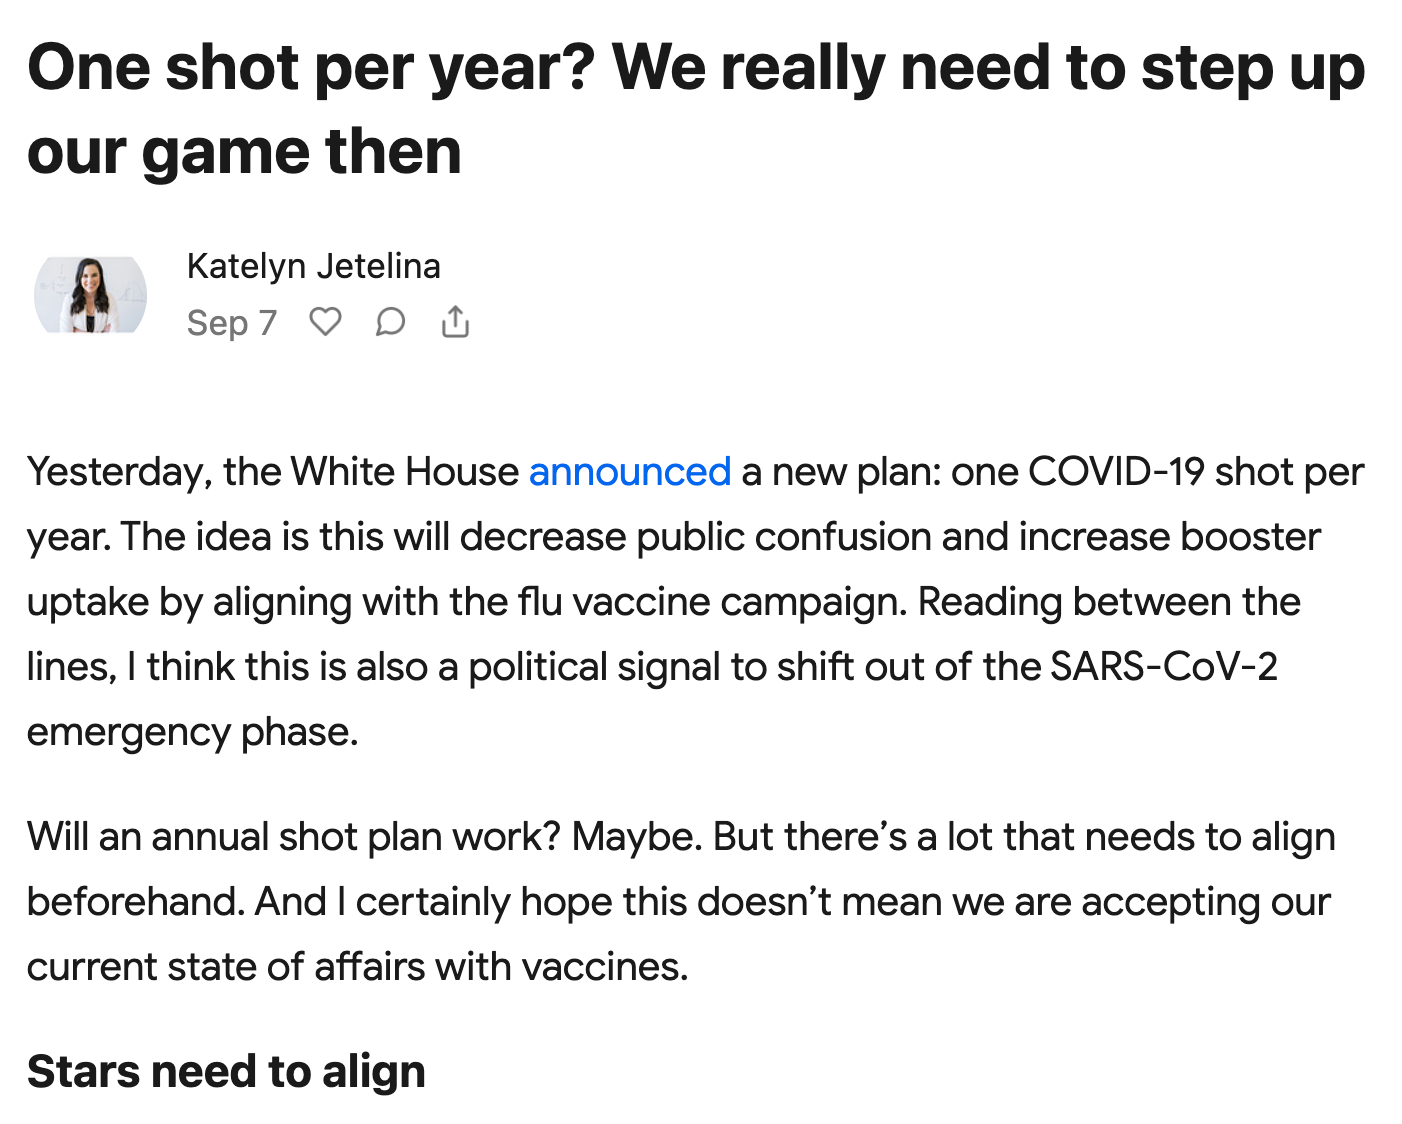 One shot per year? We really need to step up our game then. Katelyn Jetelina September 7th. Yesterday, the White House announced a new plan: one COVID-19 shot per year. The idea is this will decrease public confusion and increase booster uptake by aligning with the flu vaccine campaign. Reading between the lines, I think this is also a political signal to shift out of the SARS-CoV-2 emergency phase. Will an annual shot plan work? Maybe. But there’s a lot that needs to align beforehand. And I certainly hope this doesn’t mean we are accepting our current state of affairs with vaccines. Stars need to align